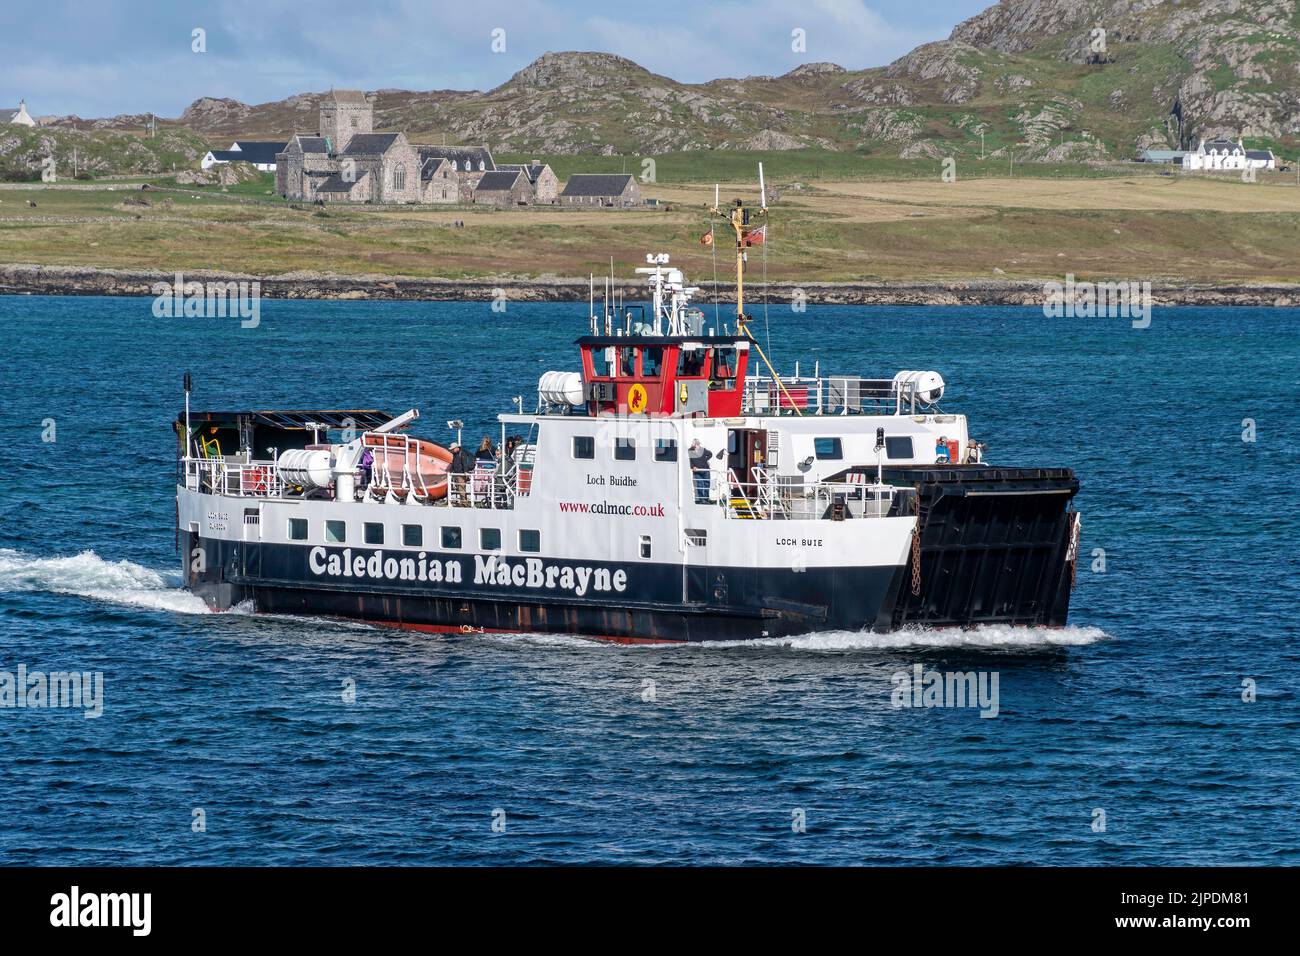 Loch Buie links Fionnphort on the Isle of Mull and the Isle of Iona in Scotland. It is operated by Caledonian MacBrayne (CalMac) - September 2018. Stock Photo